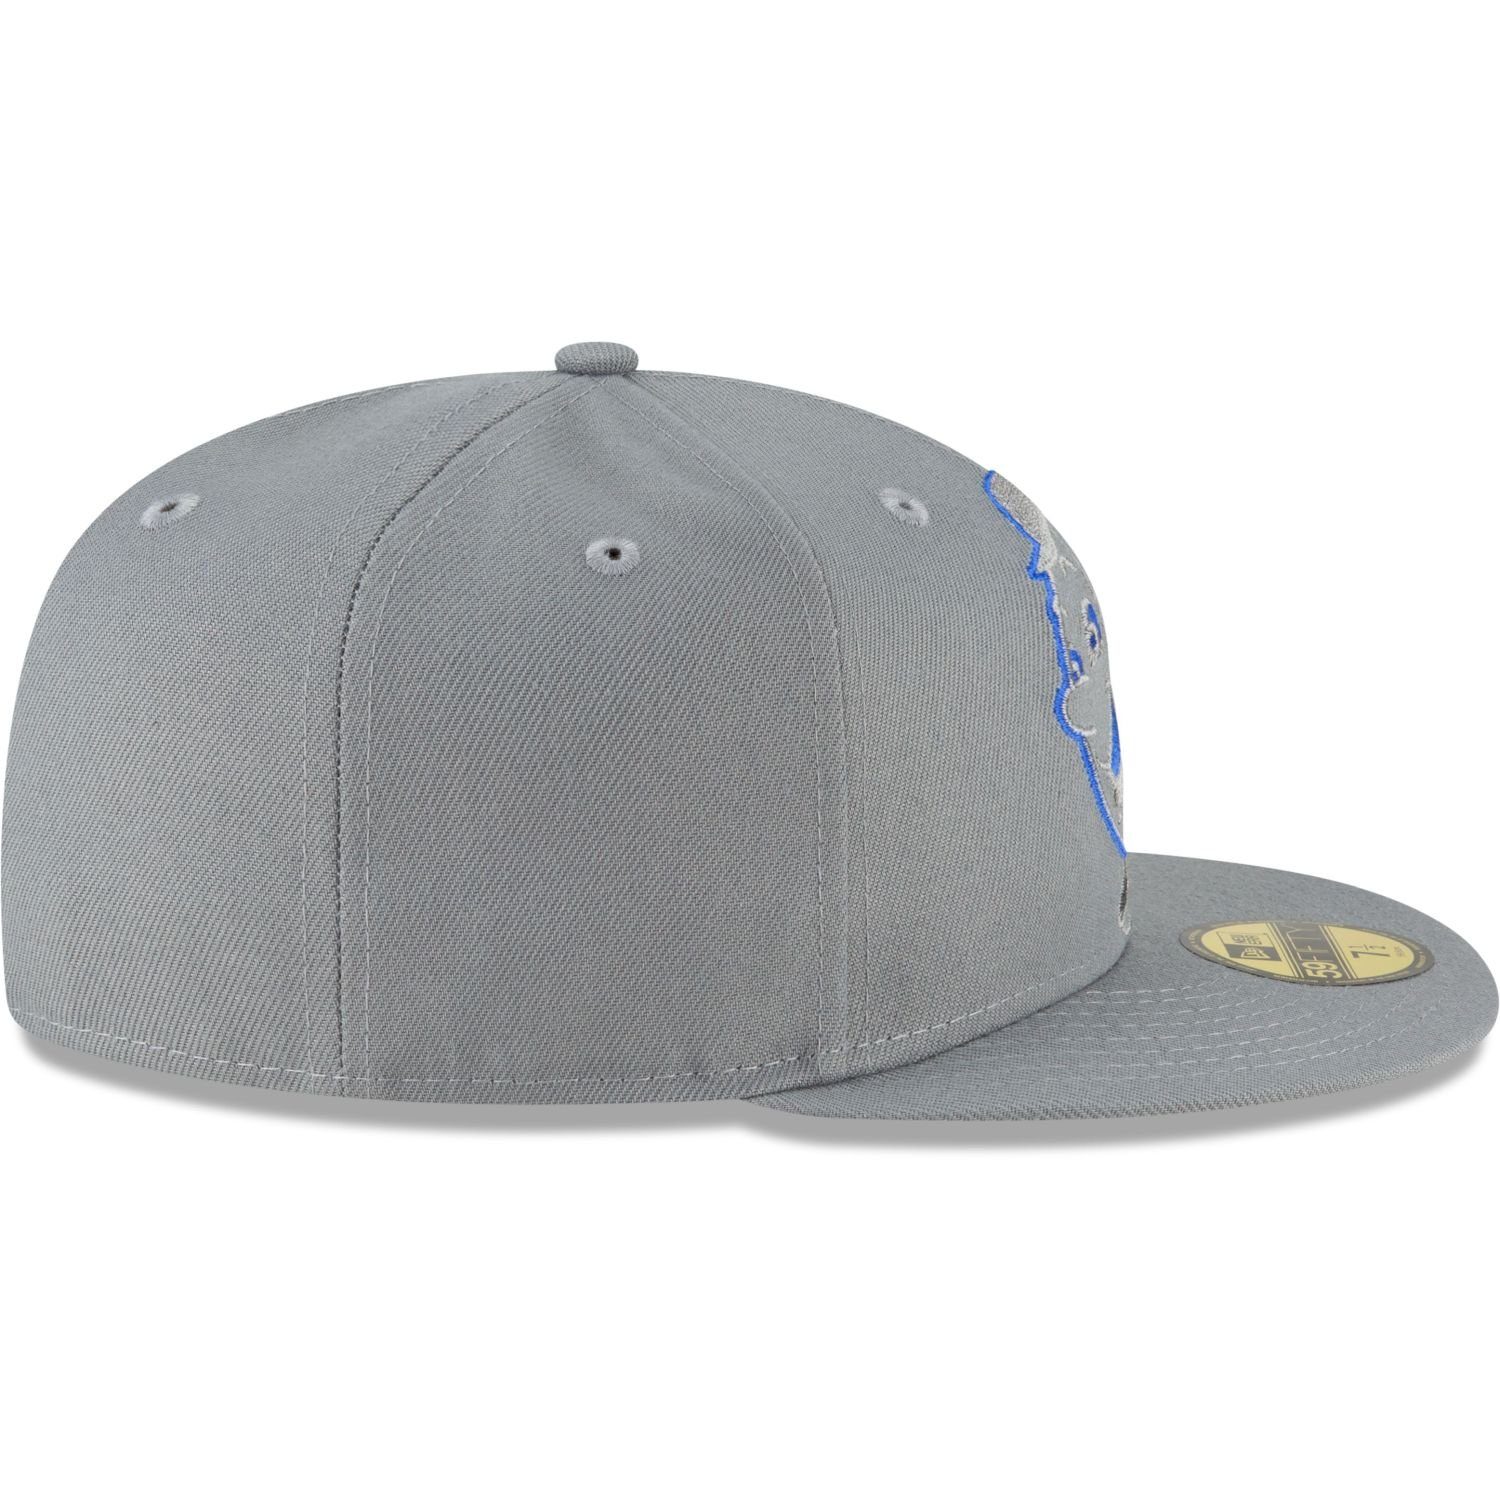 MLB York Cap New Cooperstown New Fitted 59Fifty Era Mets STORM GREY Team